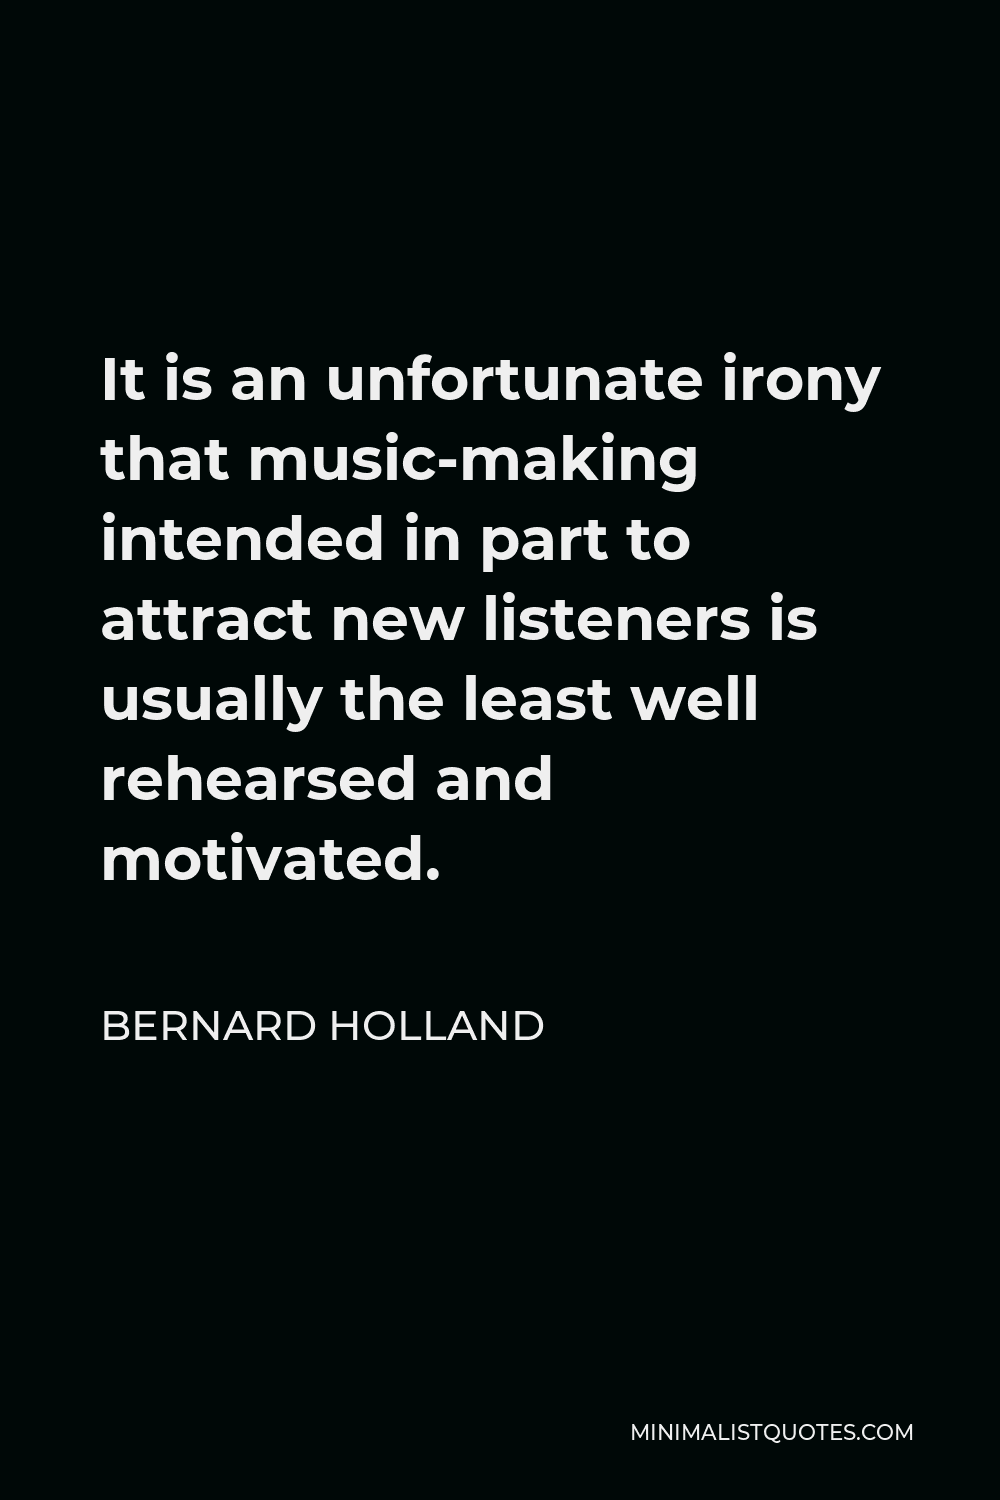 Bernard Holland Quote - It is an unfortunate irony that music-making intended in part to attract new listeners is usually the least well rehearsed and motivated.